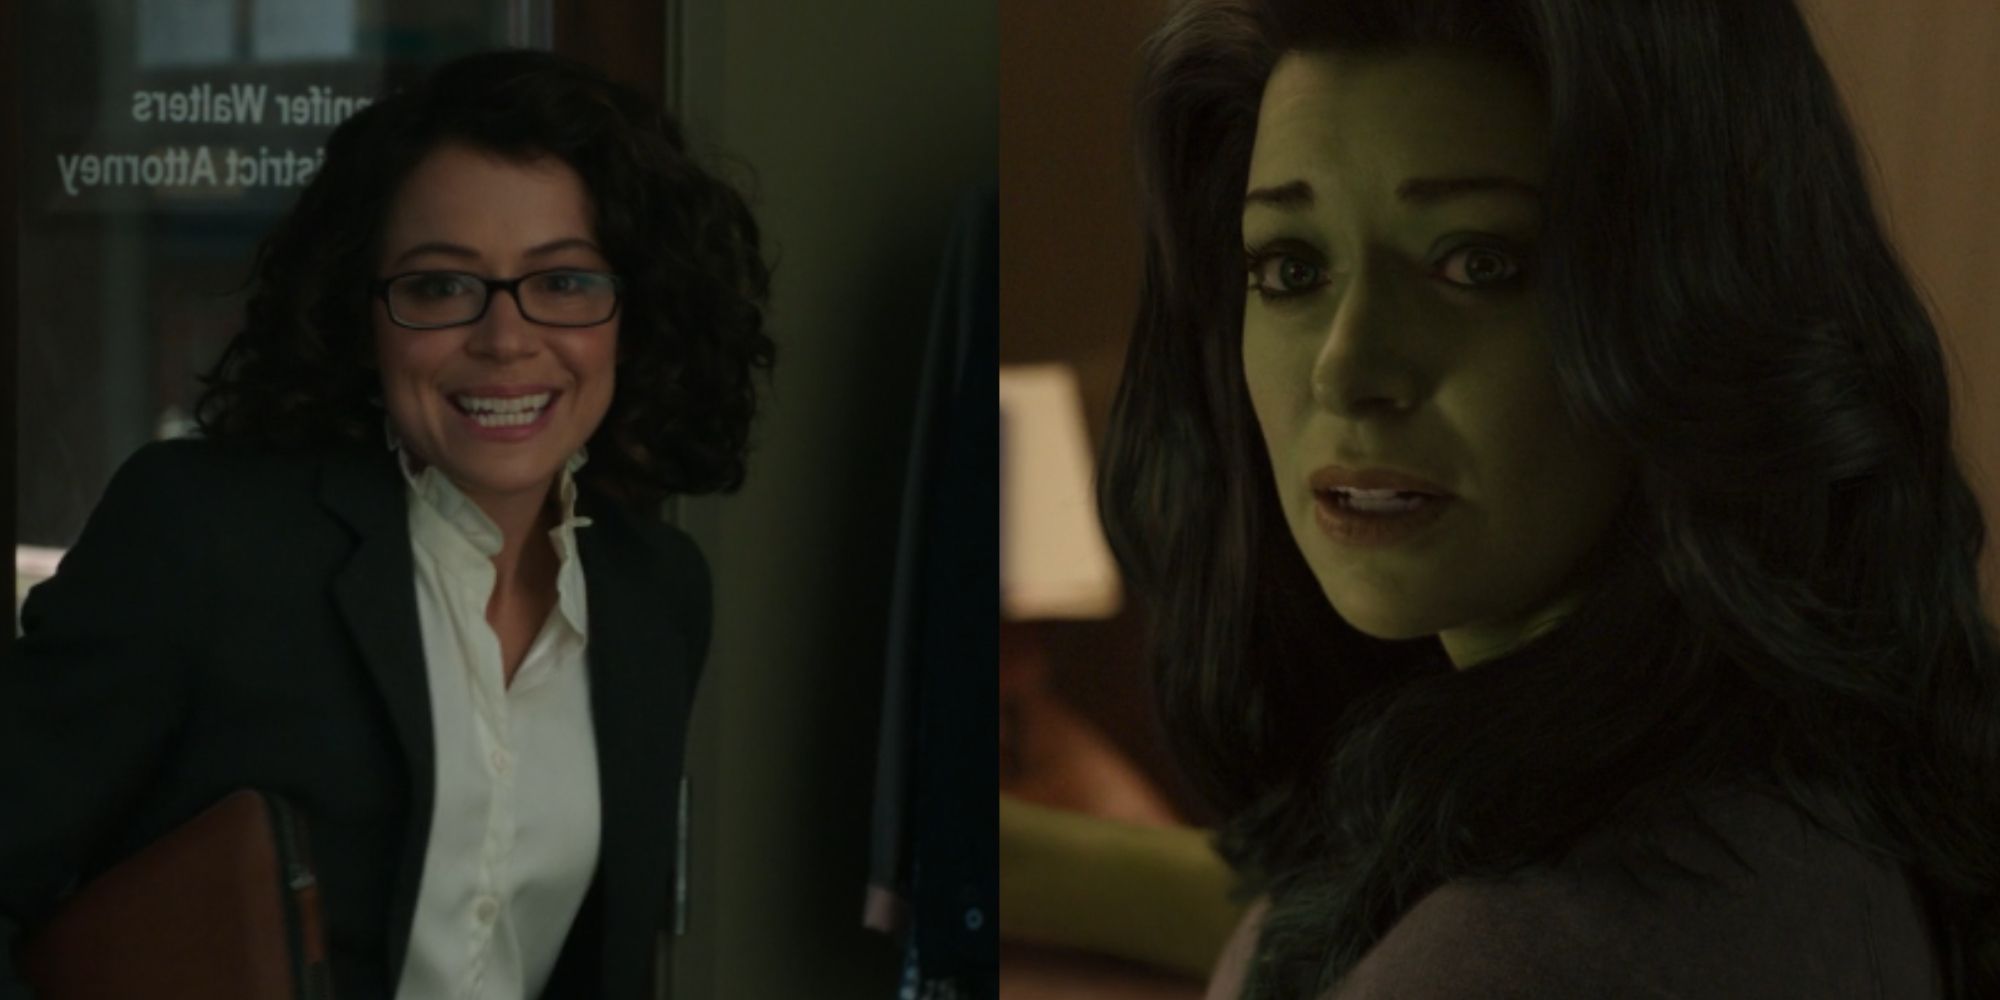 Split images of Jennifer Walters in her office and She-Hulk turning around to the camera